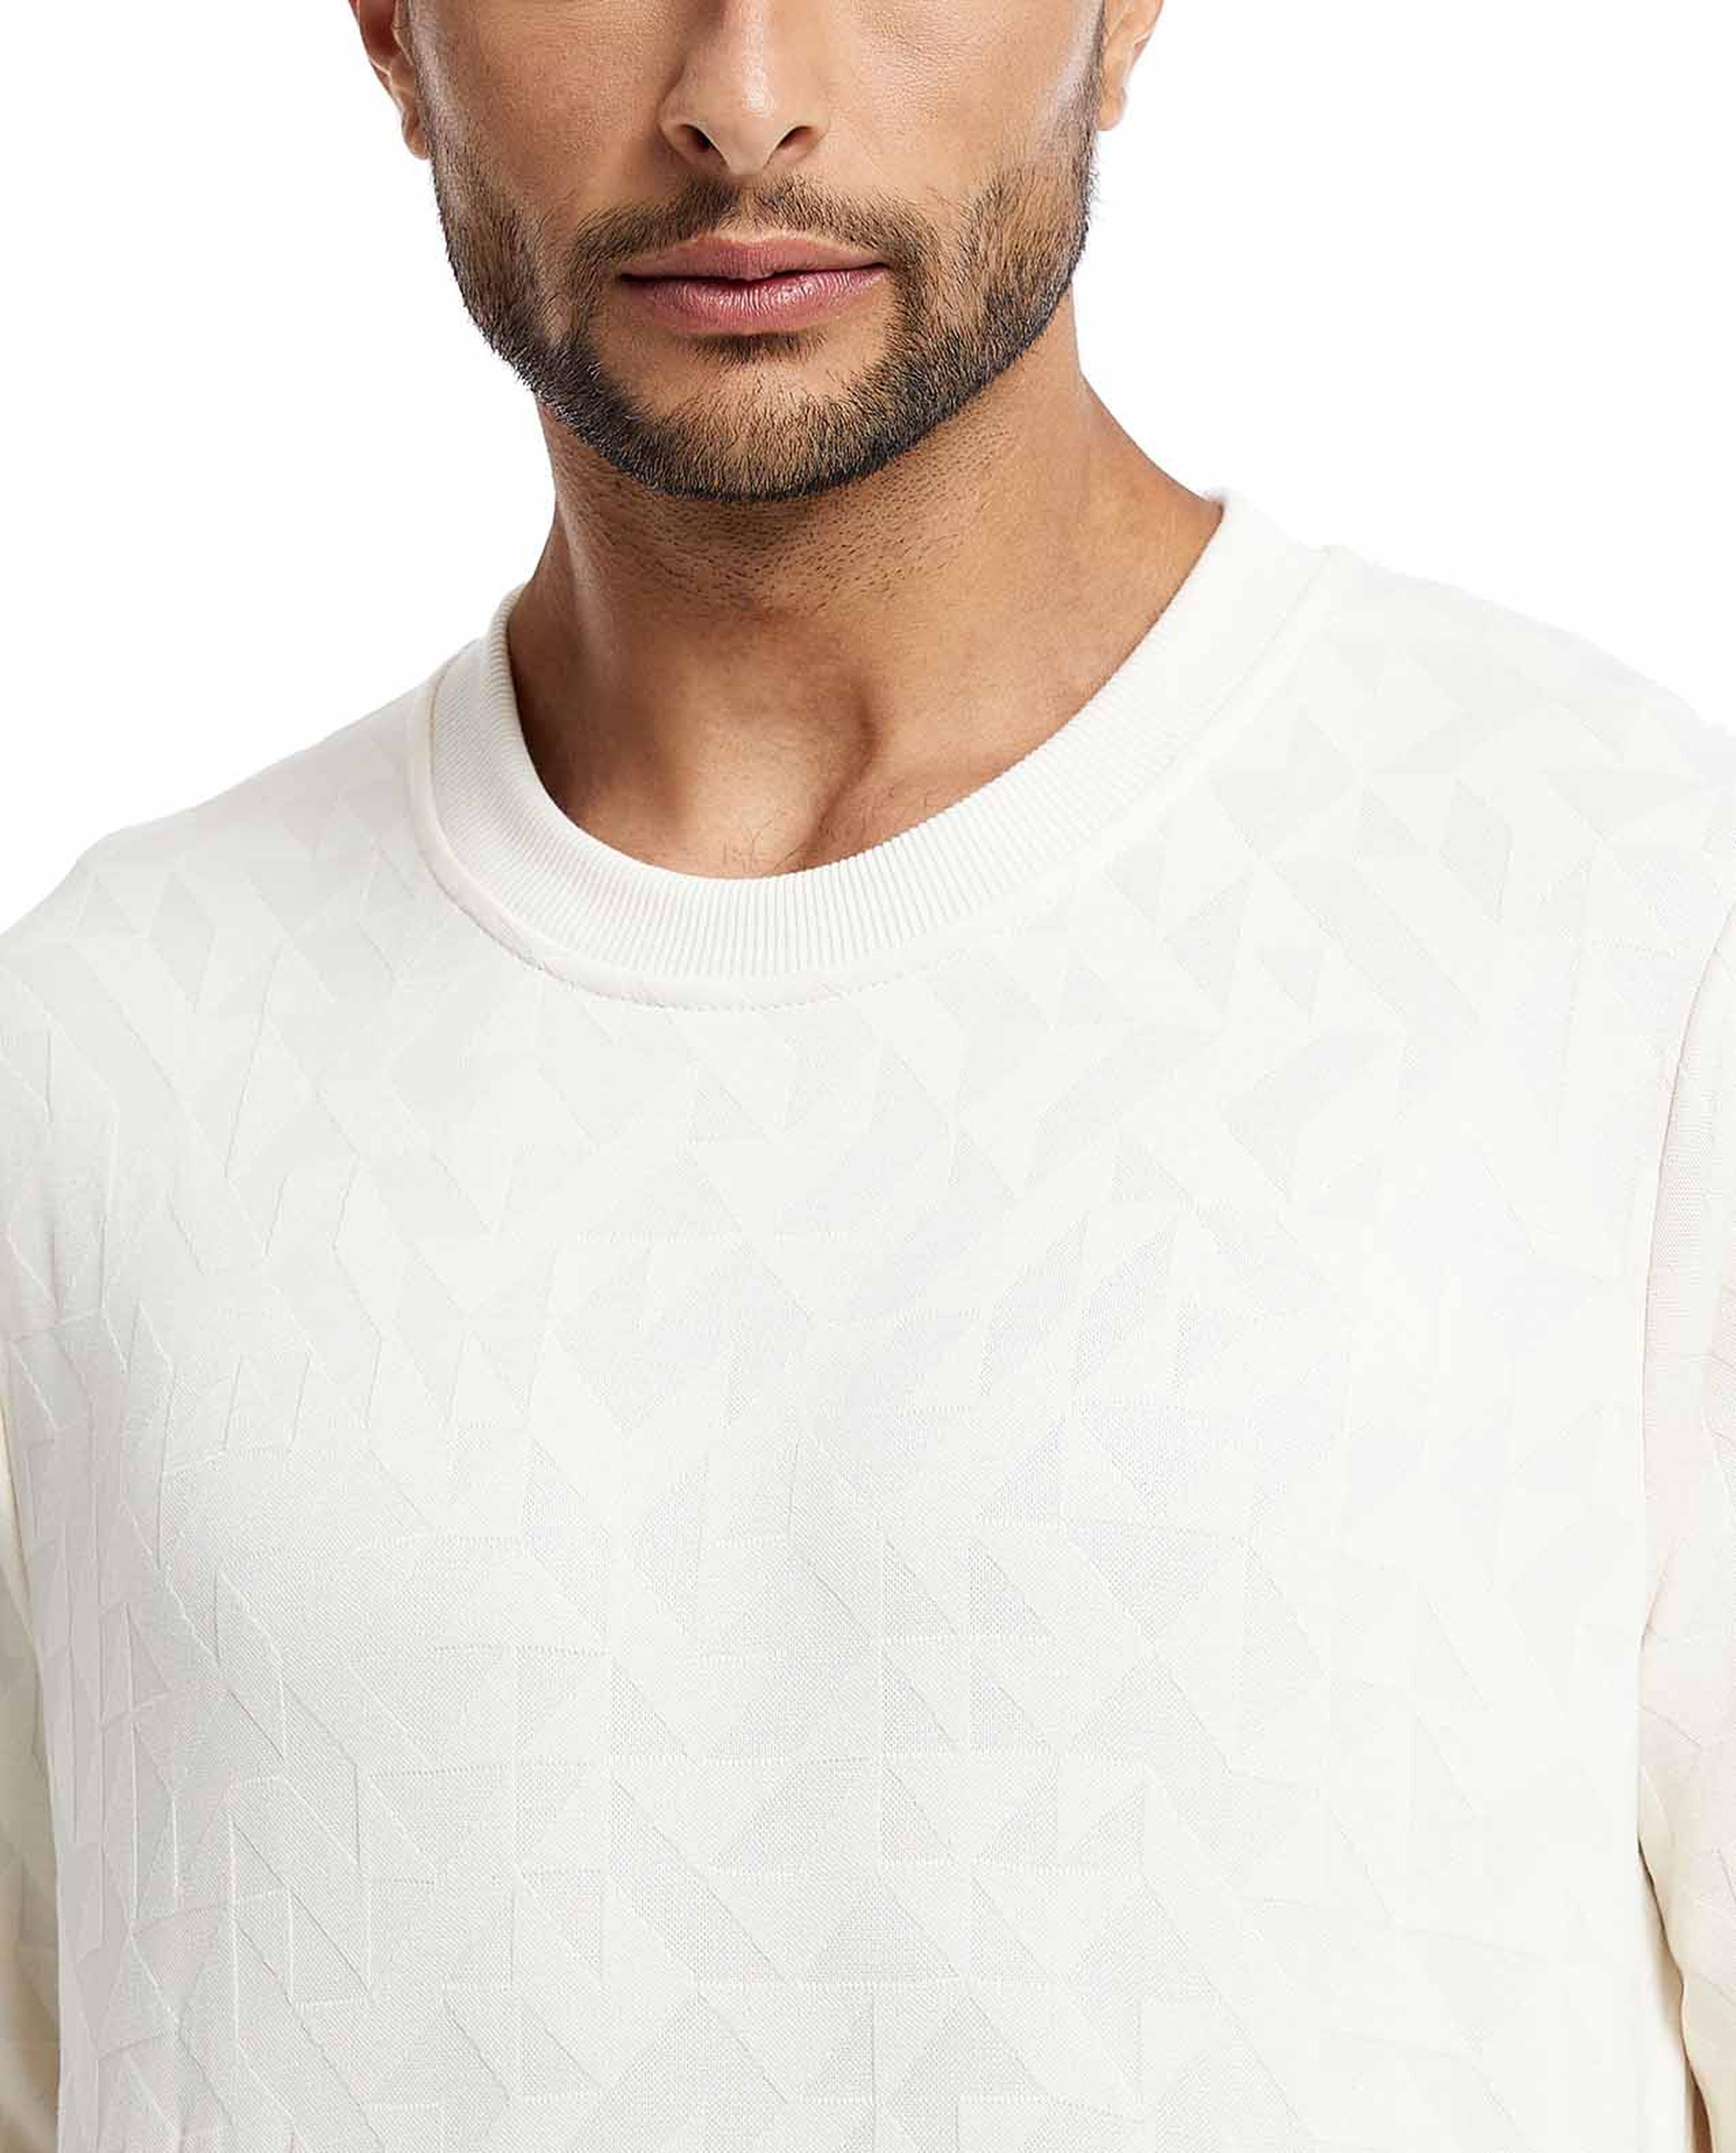 Self Patterned Sweatshirt with Crew Neck and Long Sleeves